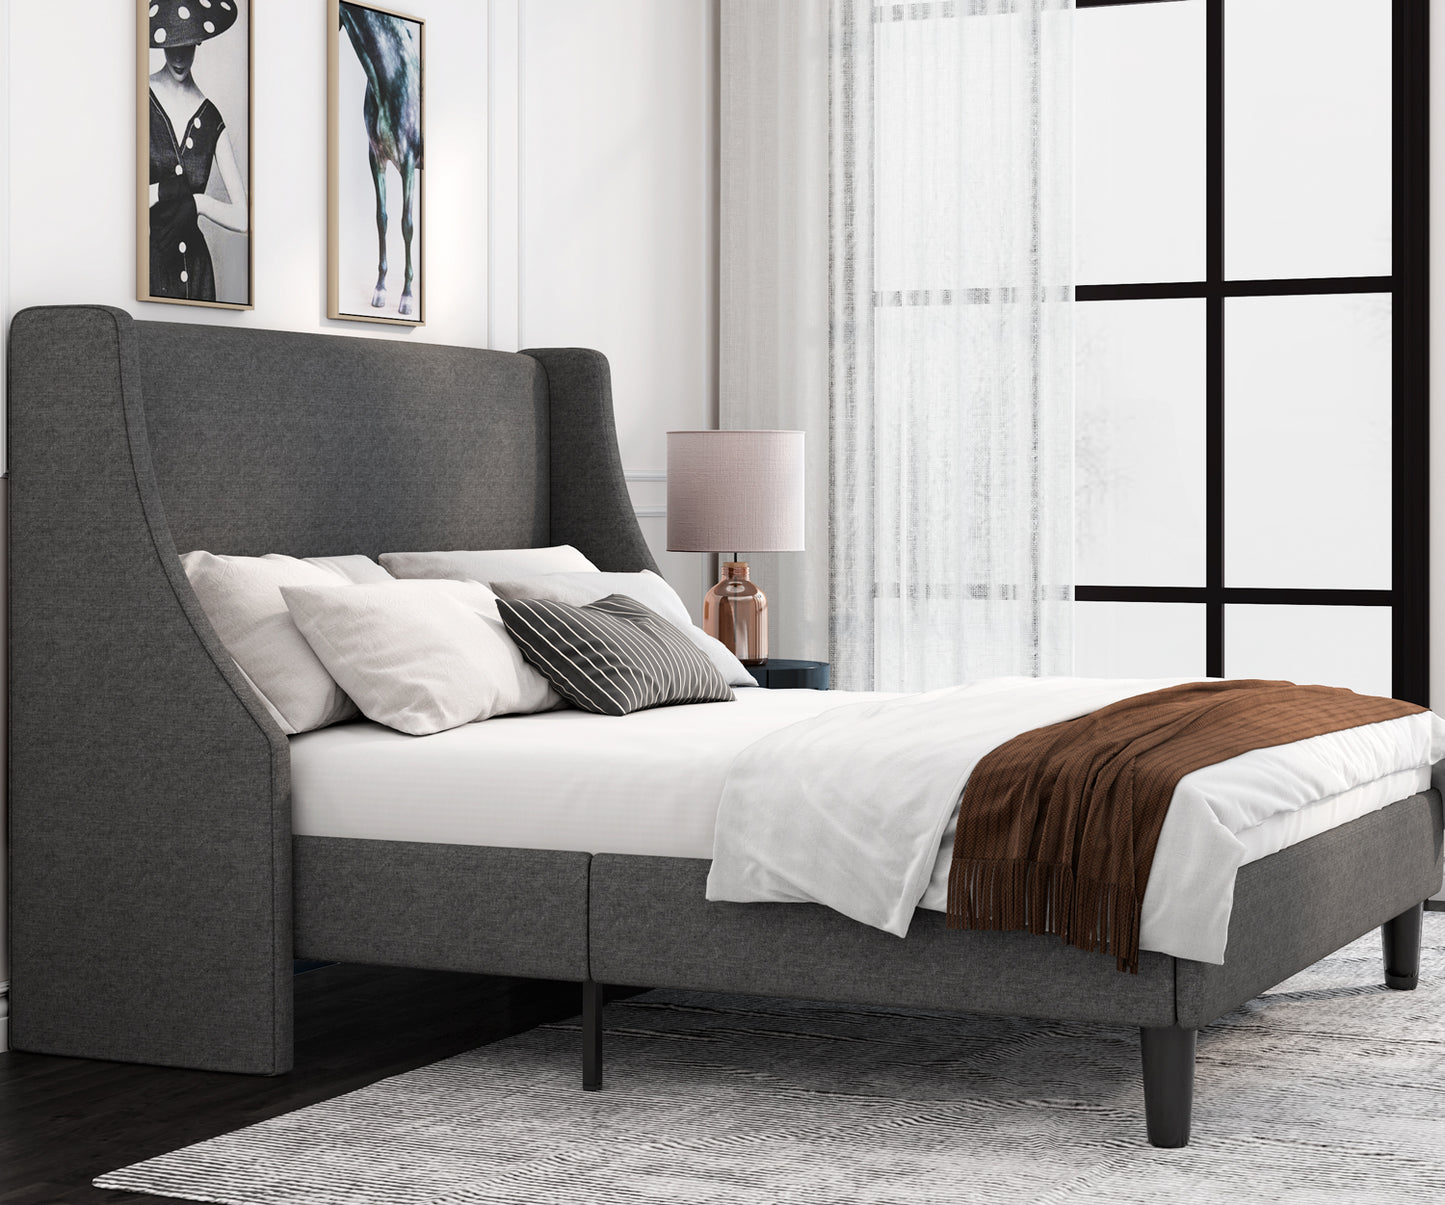 Allewie Queen Size Fabric Upholstered Platform Bed Frame with Wingback Headboard, Light Grey